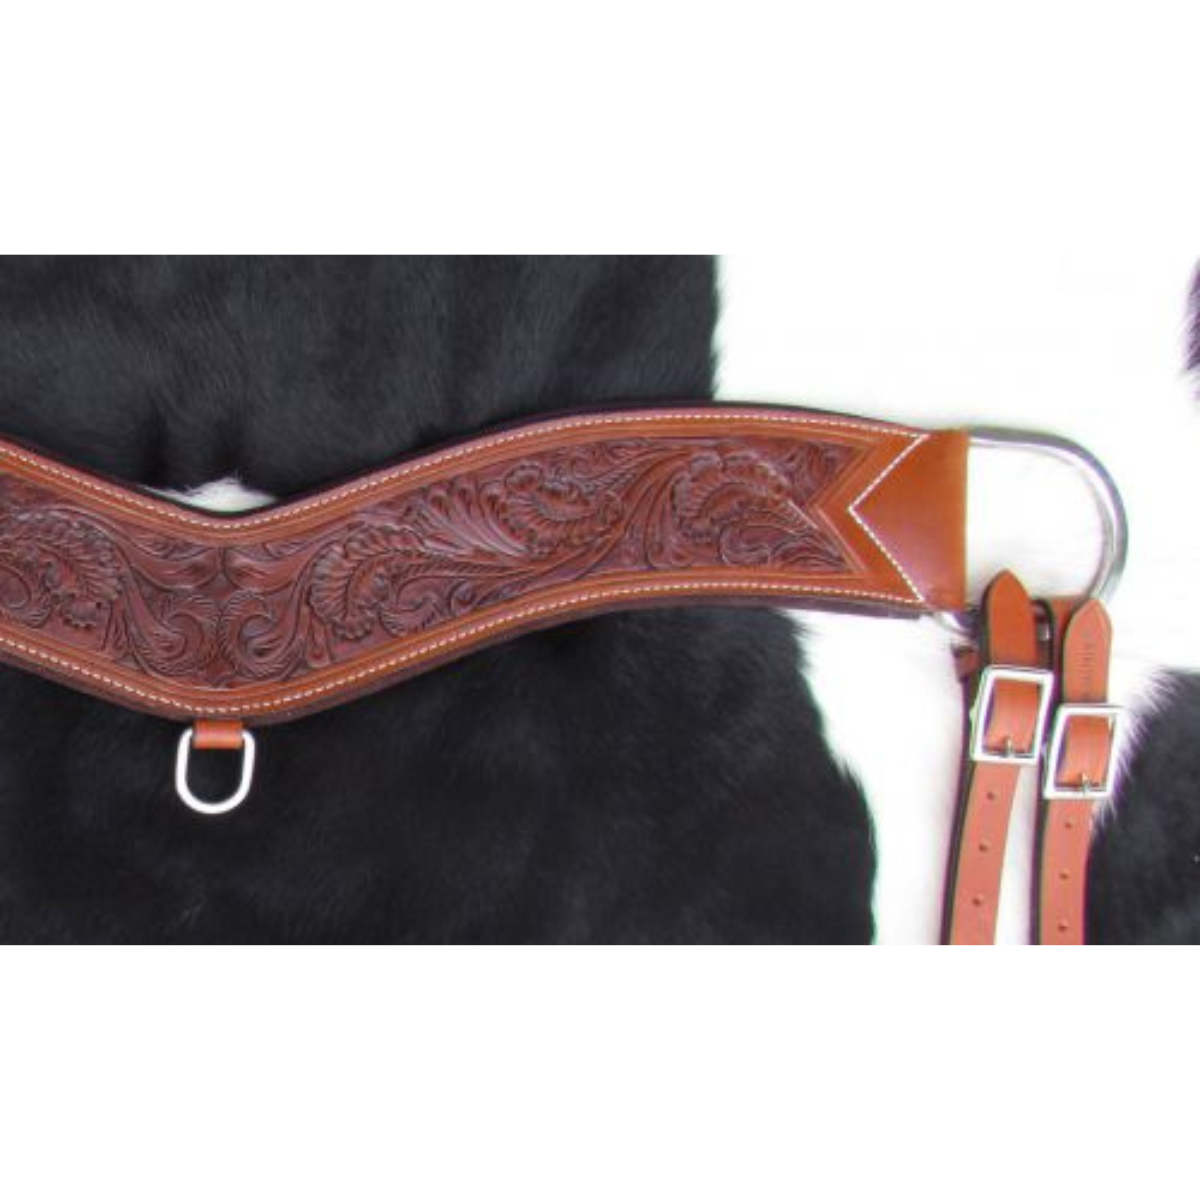 Showman ® Floral tooled tripping collar. - Double T Saddles